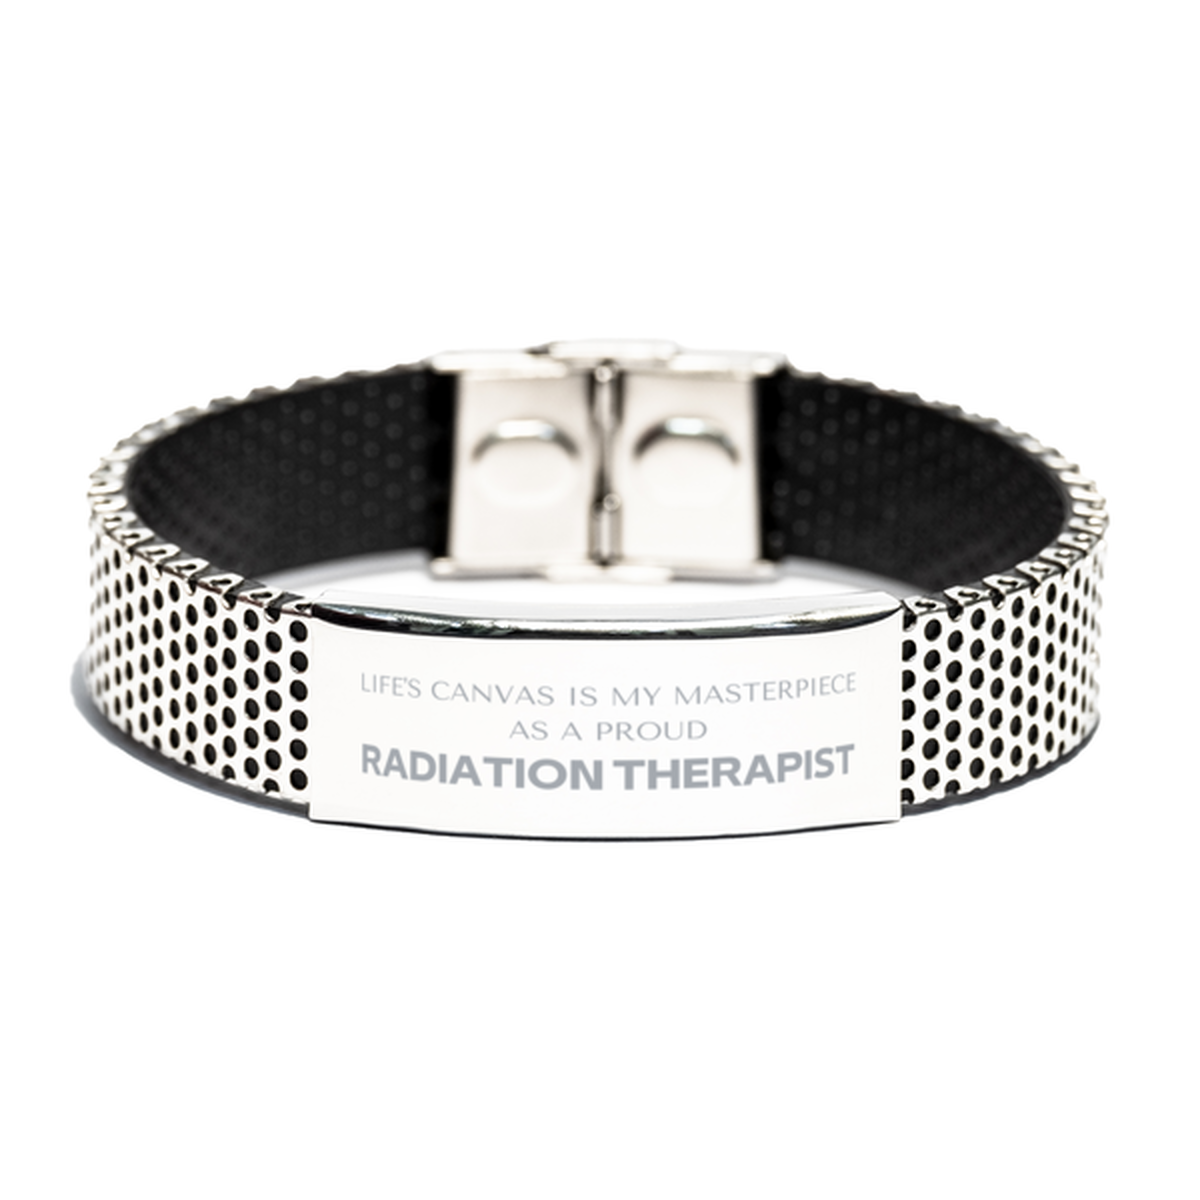 Proud Radiation Therapist Gifts, Life's canvas is my masterpiece, Epic Birthday Christmas Unique Stainless Steel Bracelet For Radiation Therapist, Coworkers, Men, Women, Friends